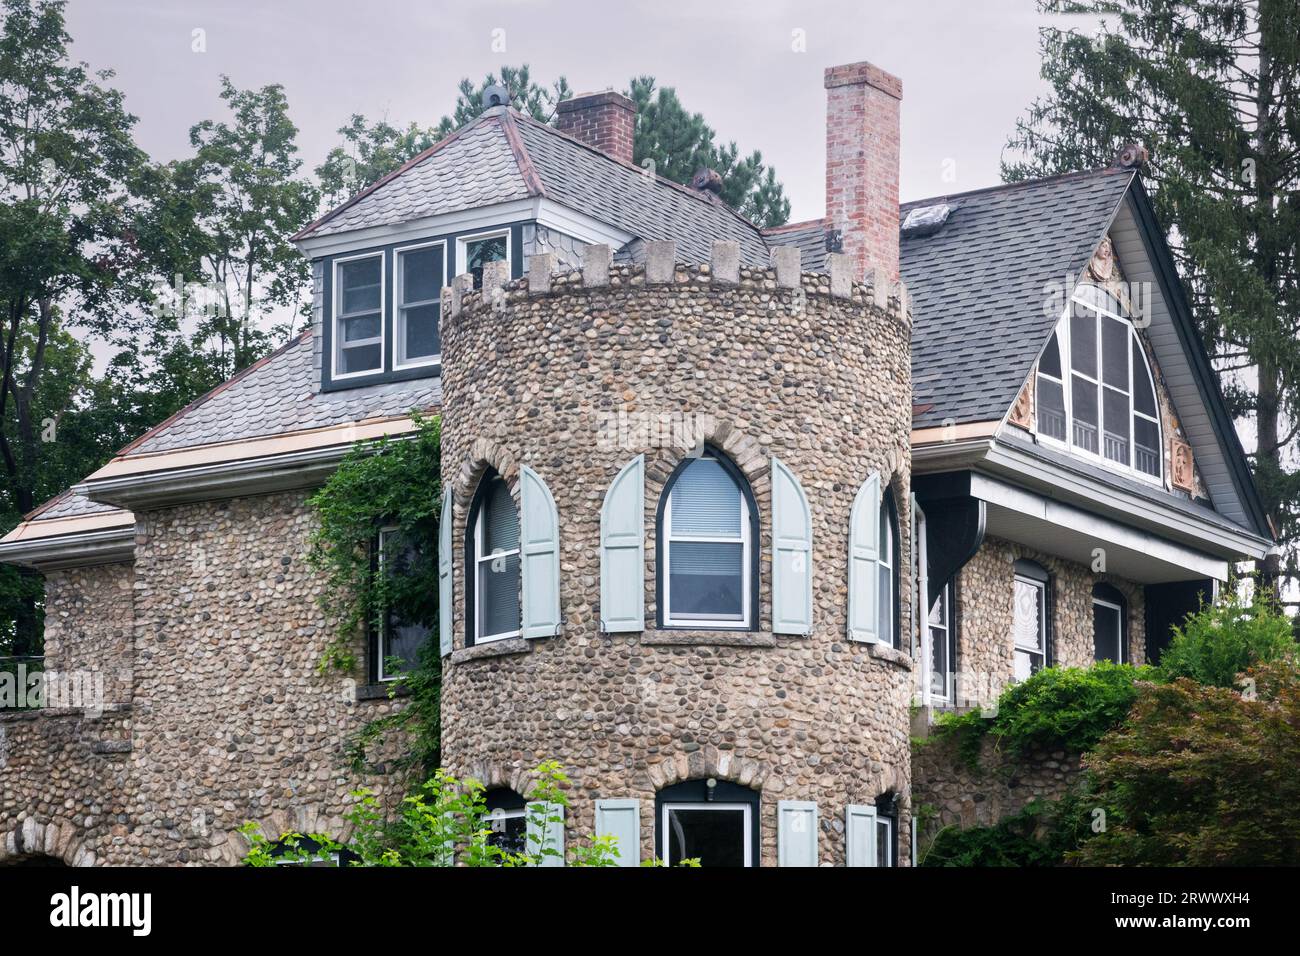 16 Bedford Road in Katonah. A  rentable mansion moved from Old Katonah at the end of the 19th Century. In Westchester, New York. Stock Photo